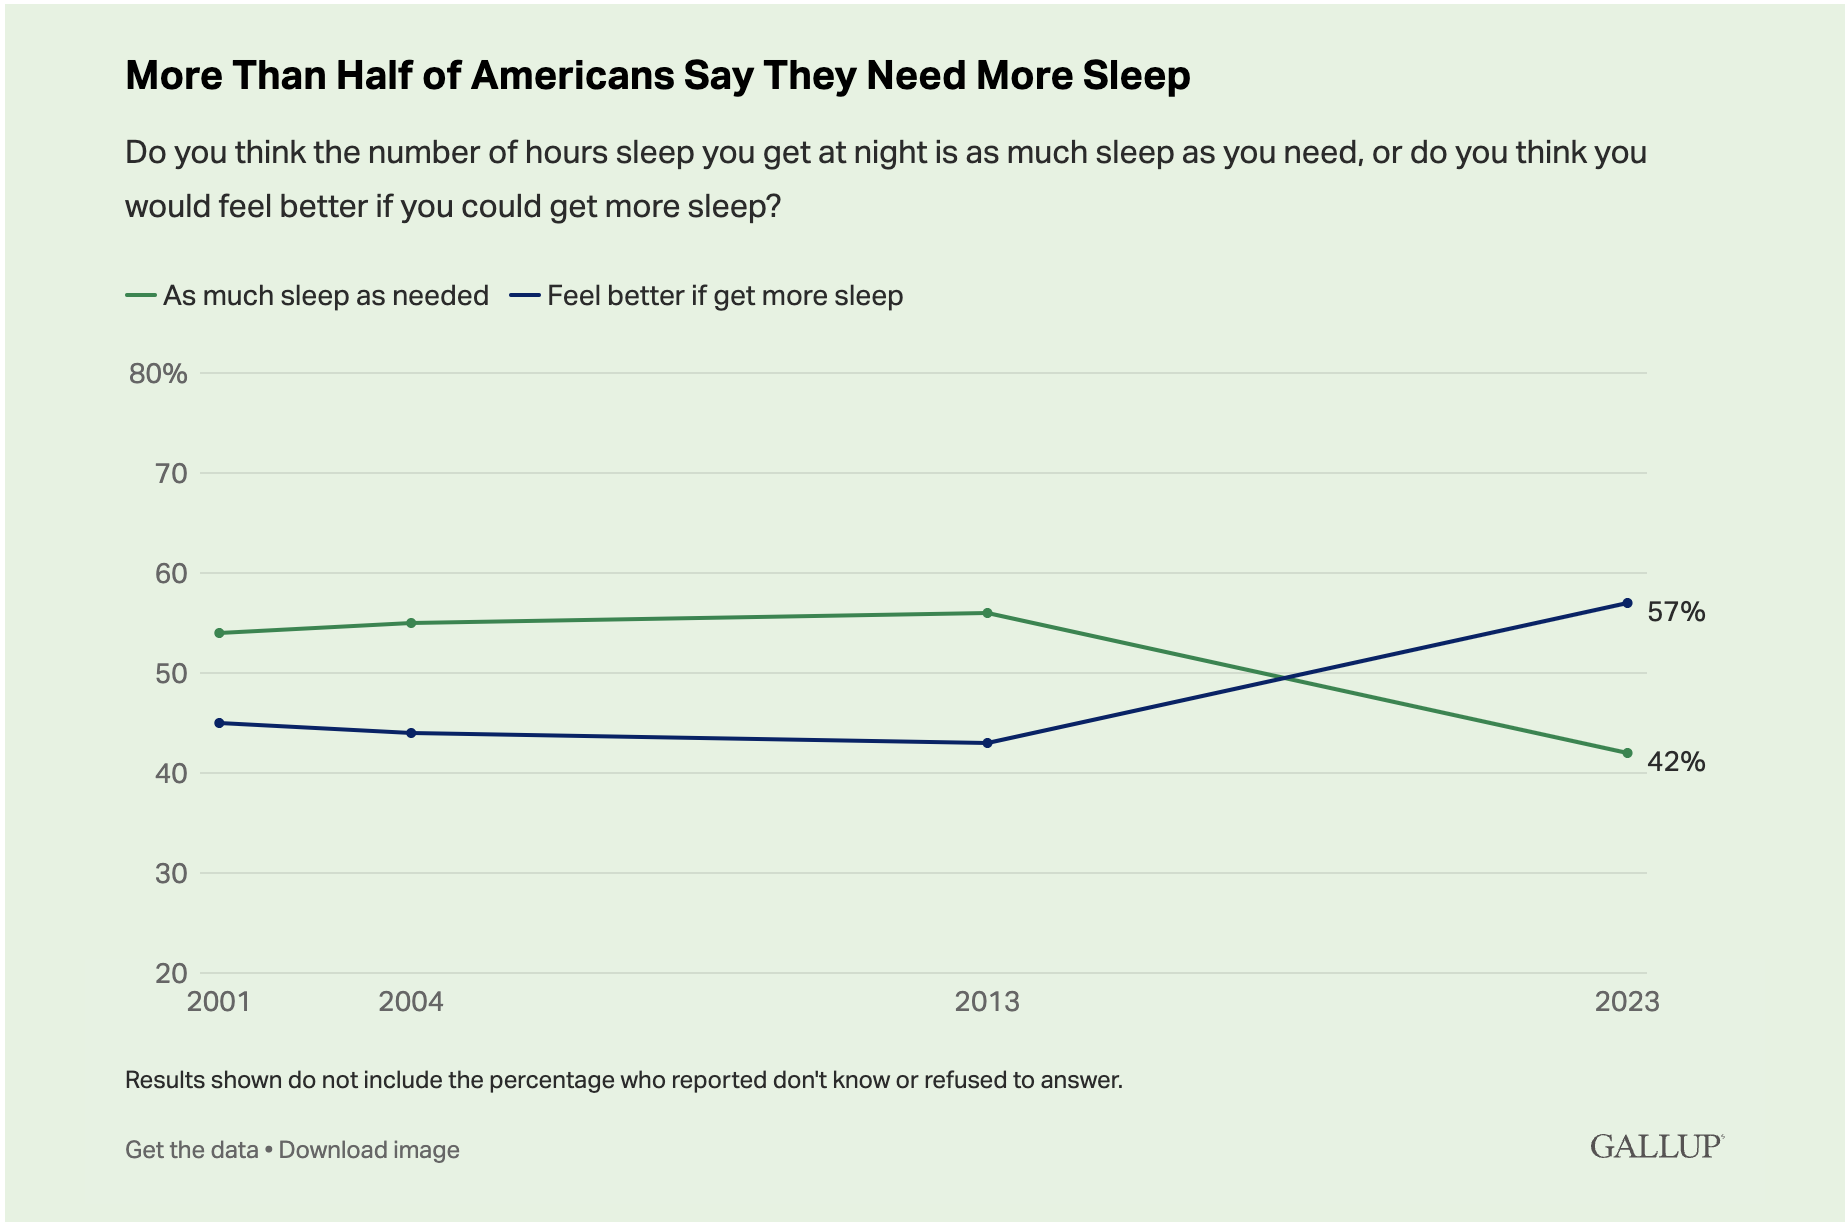 A chart shows whether Americans think they get as much sleep as needed versus those who think they'd feel better if they got more sleep. 